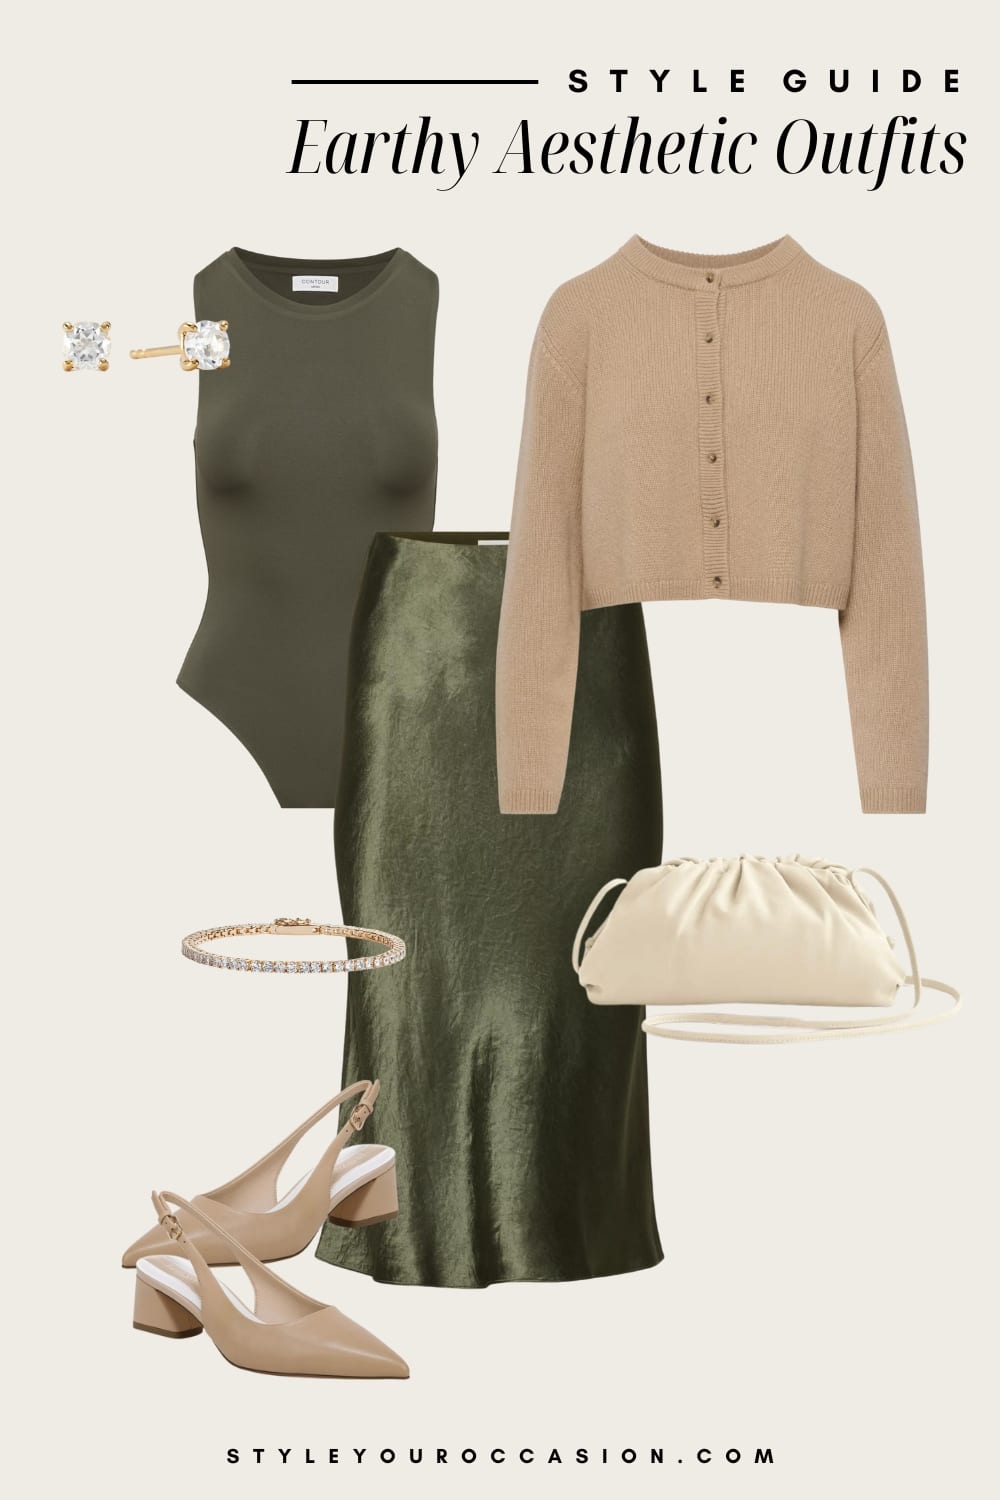 Flat lay outfit graphic of a green slip skirt, a green bodysuit, a tan cardigan and neutral accessories.